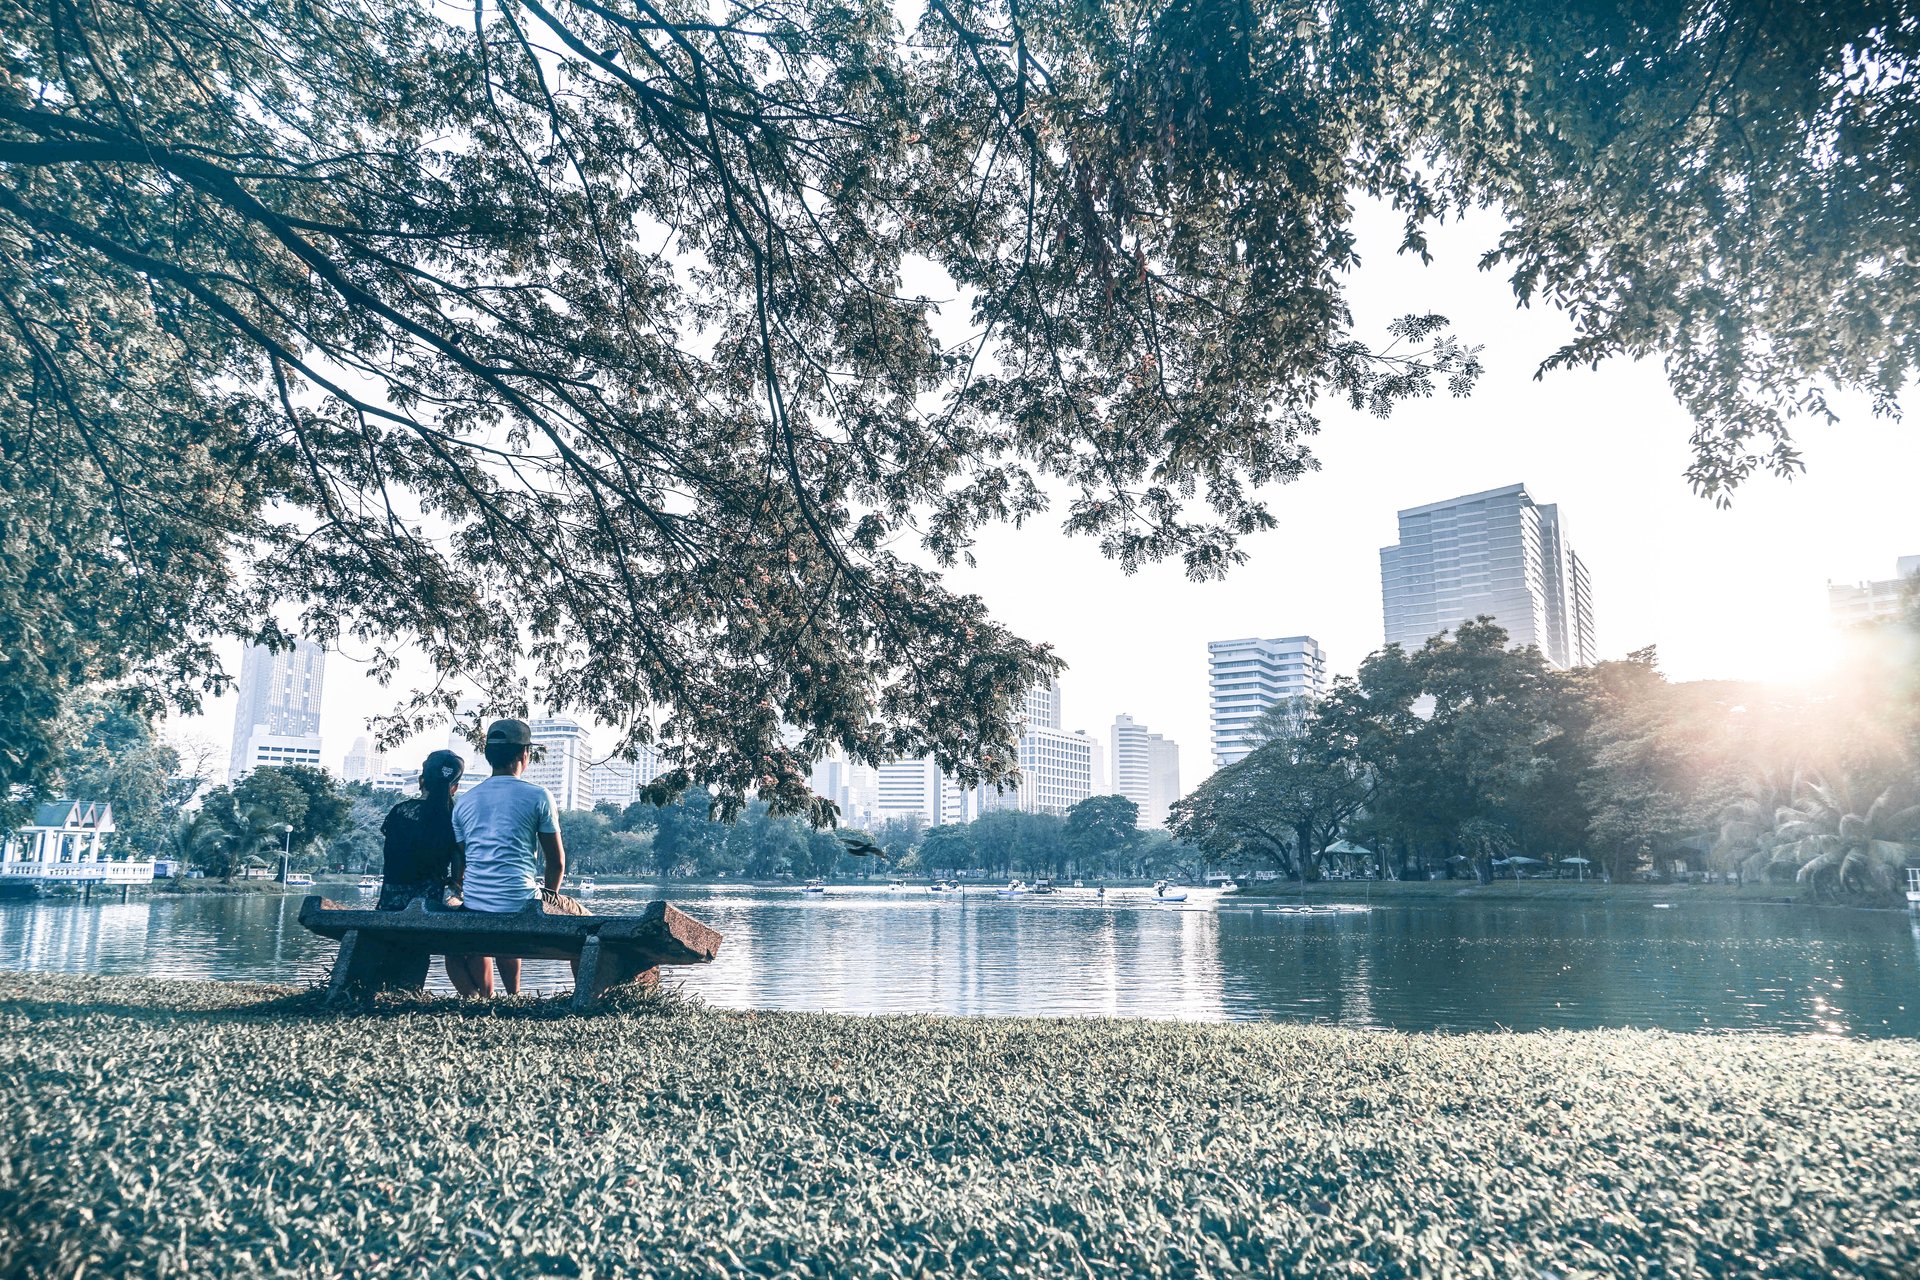 COUPLE_ON_BENCH_IN_PARK